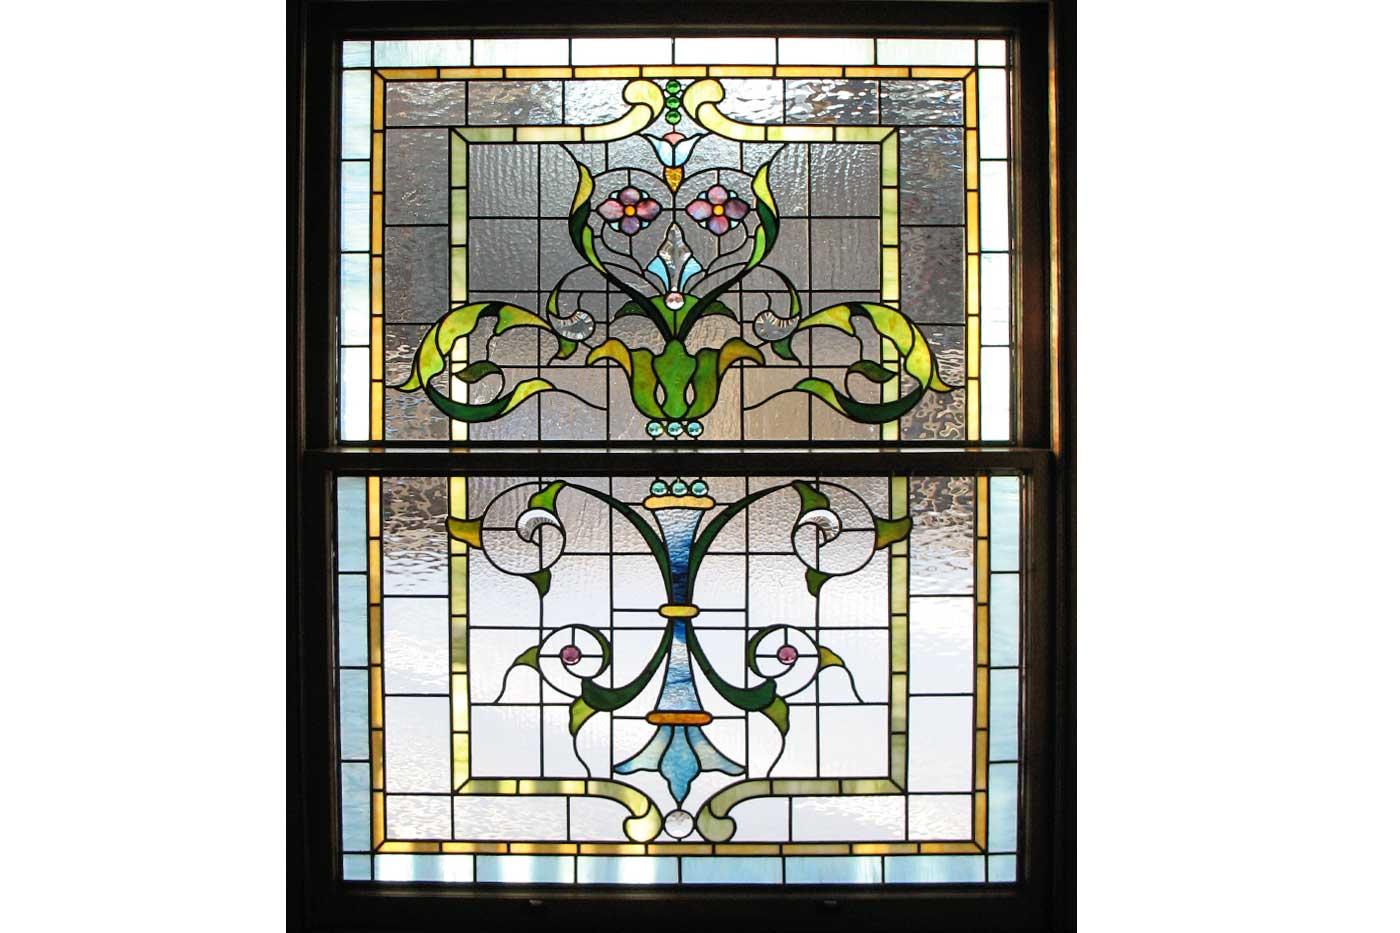 Ann Wolff's custom stained glass work makes a beautiful home accent.